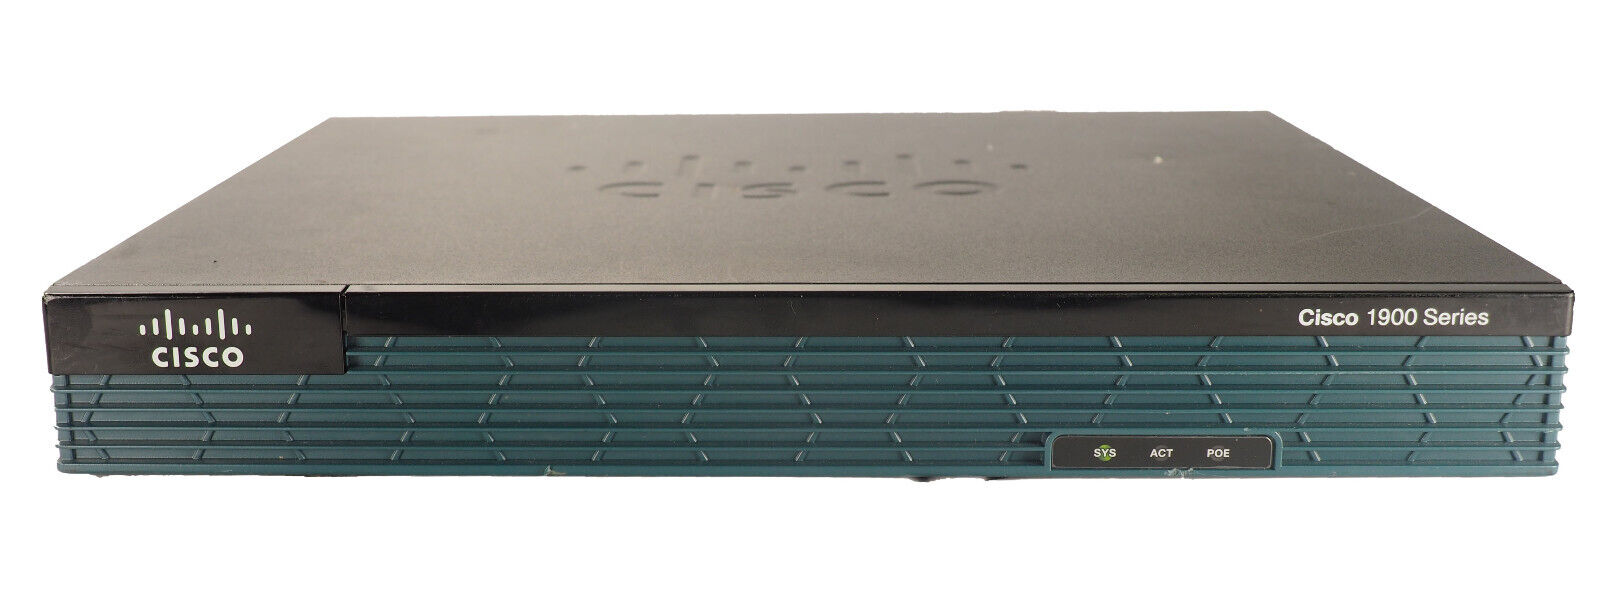 Cisco 1900 Series CISCO1921/K9 ISR Integrated Services Router 